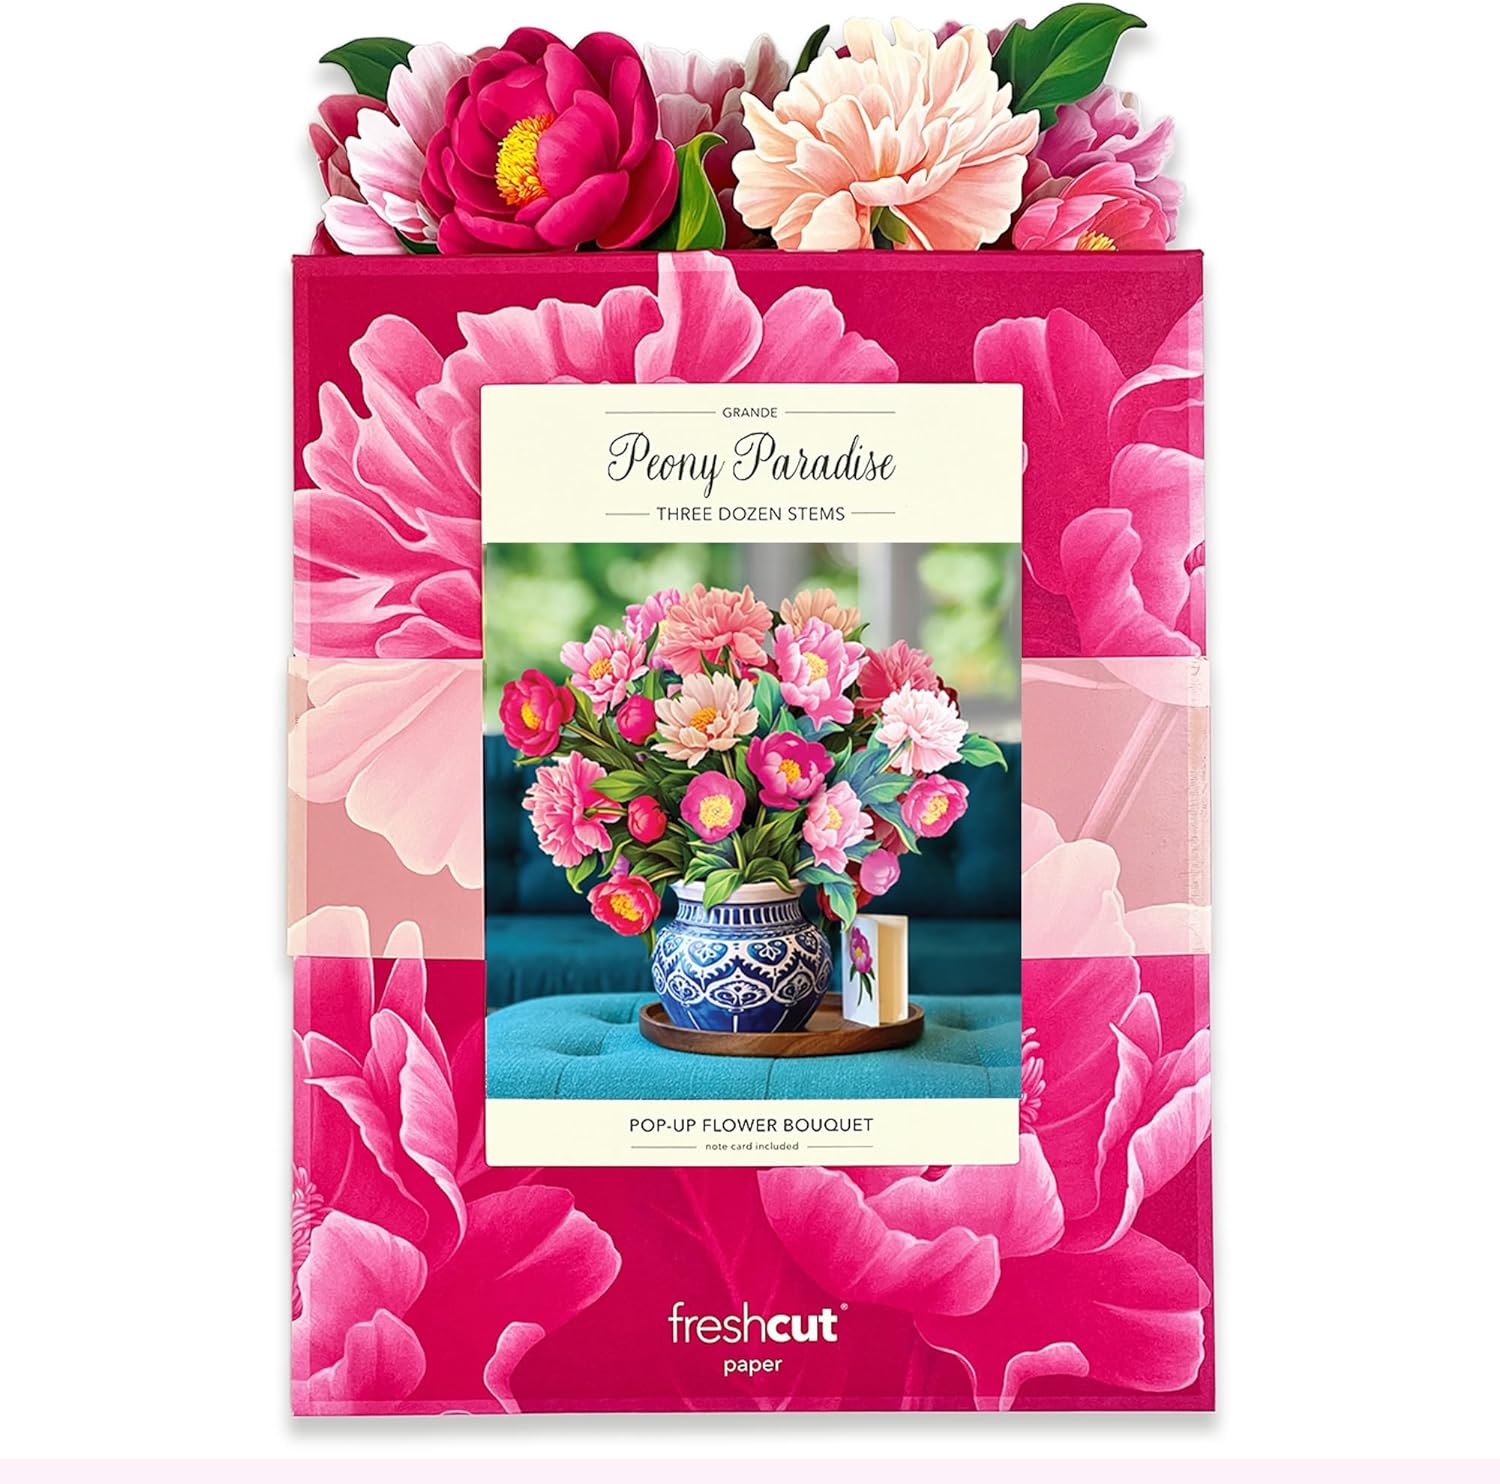 Freshcut Paper Pop Up Cards, Best Mom Peony Paradise, 12 Inch Life Sized Forever Flower Bouquet 3D Popup Greeting Cards, Birthday Gift Cards, Gifts For Her, Mothers Day Gifts With Note Card And Envelope